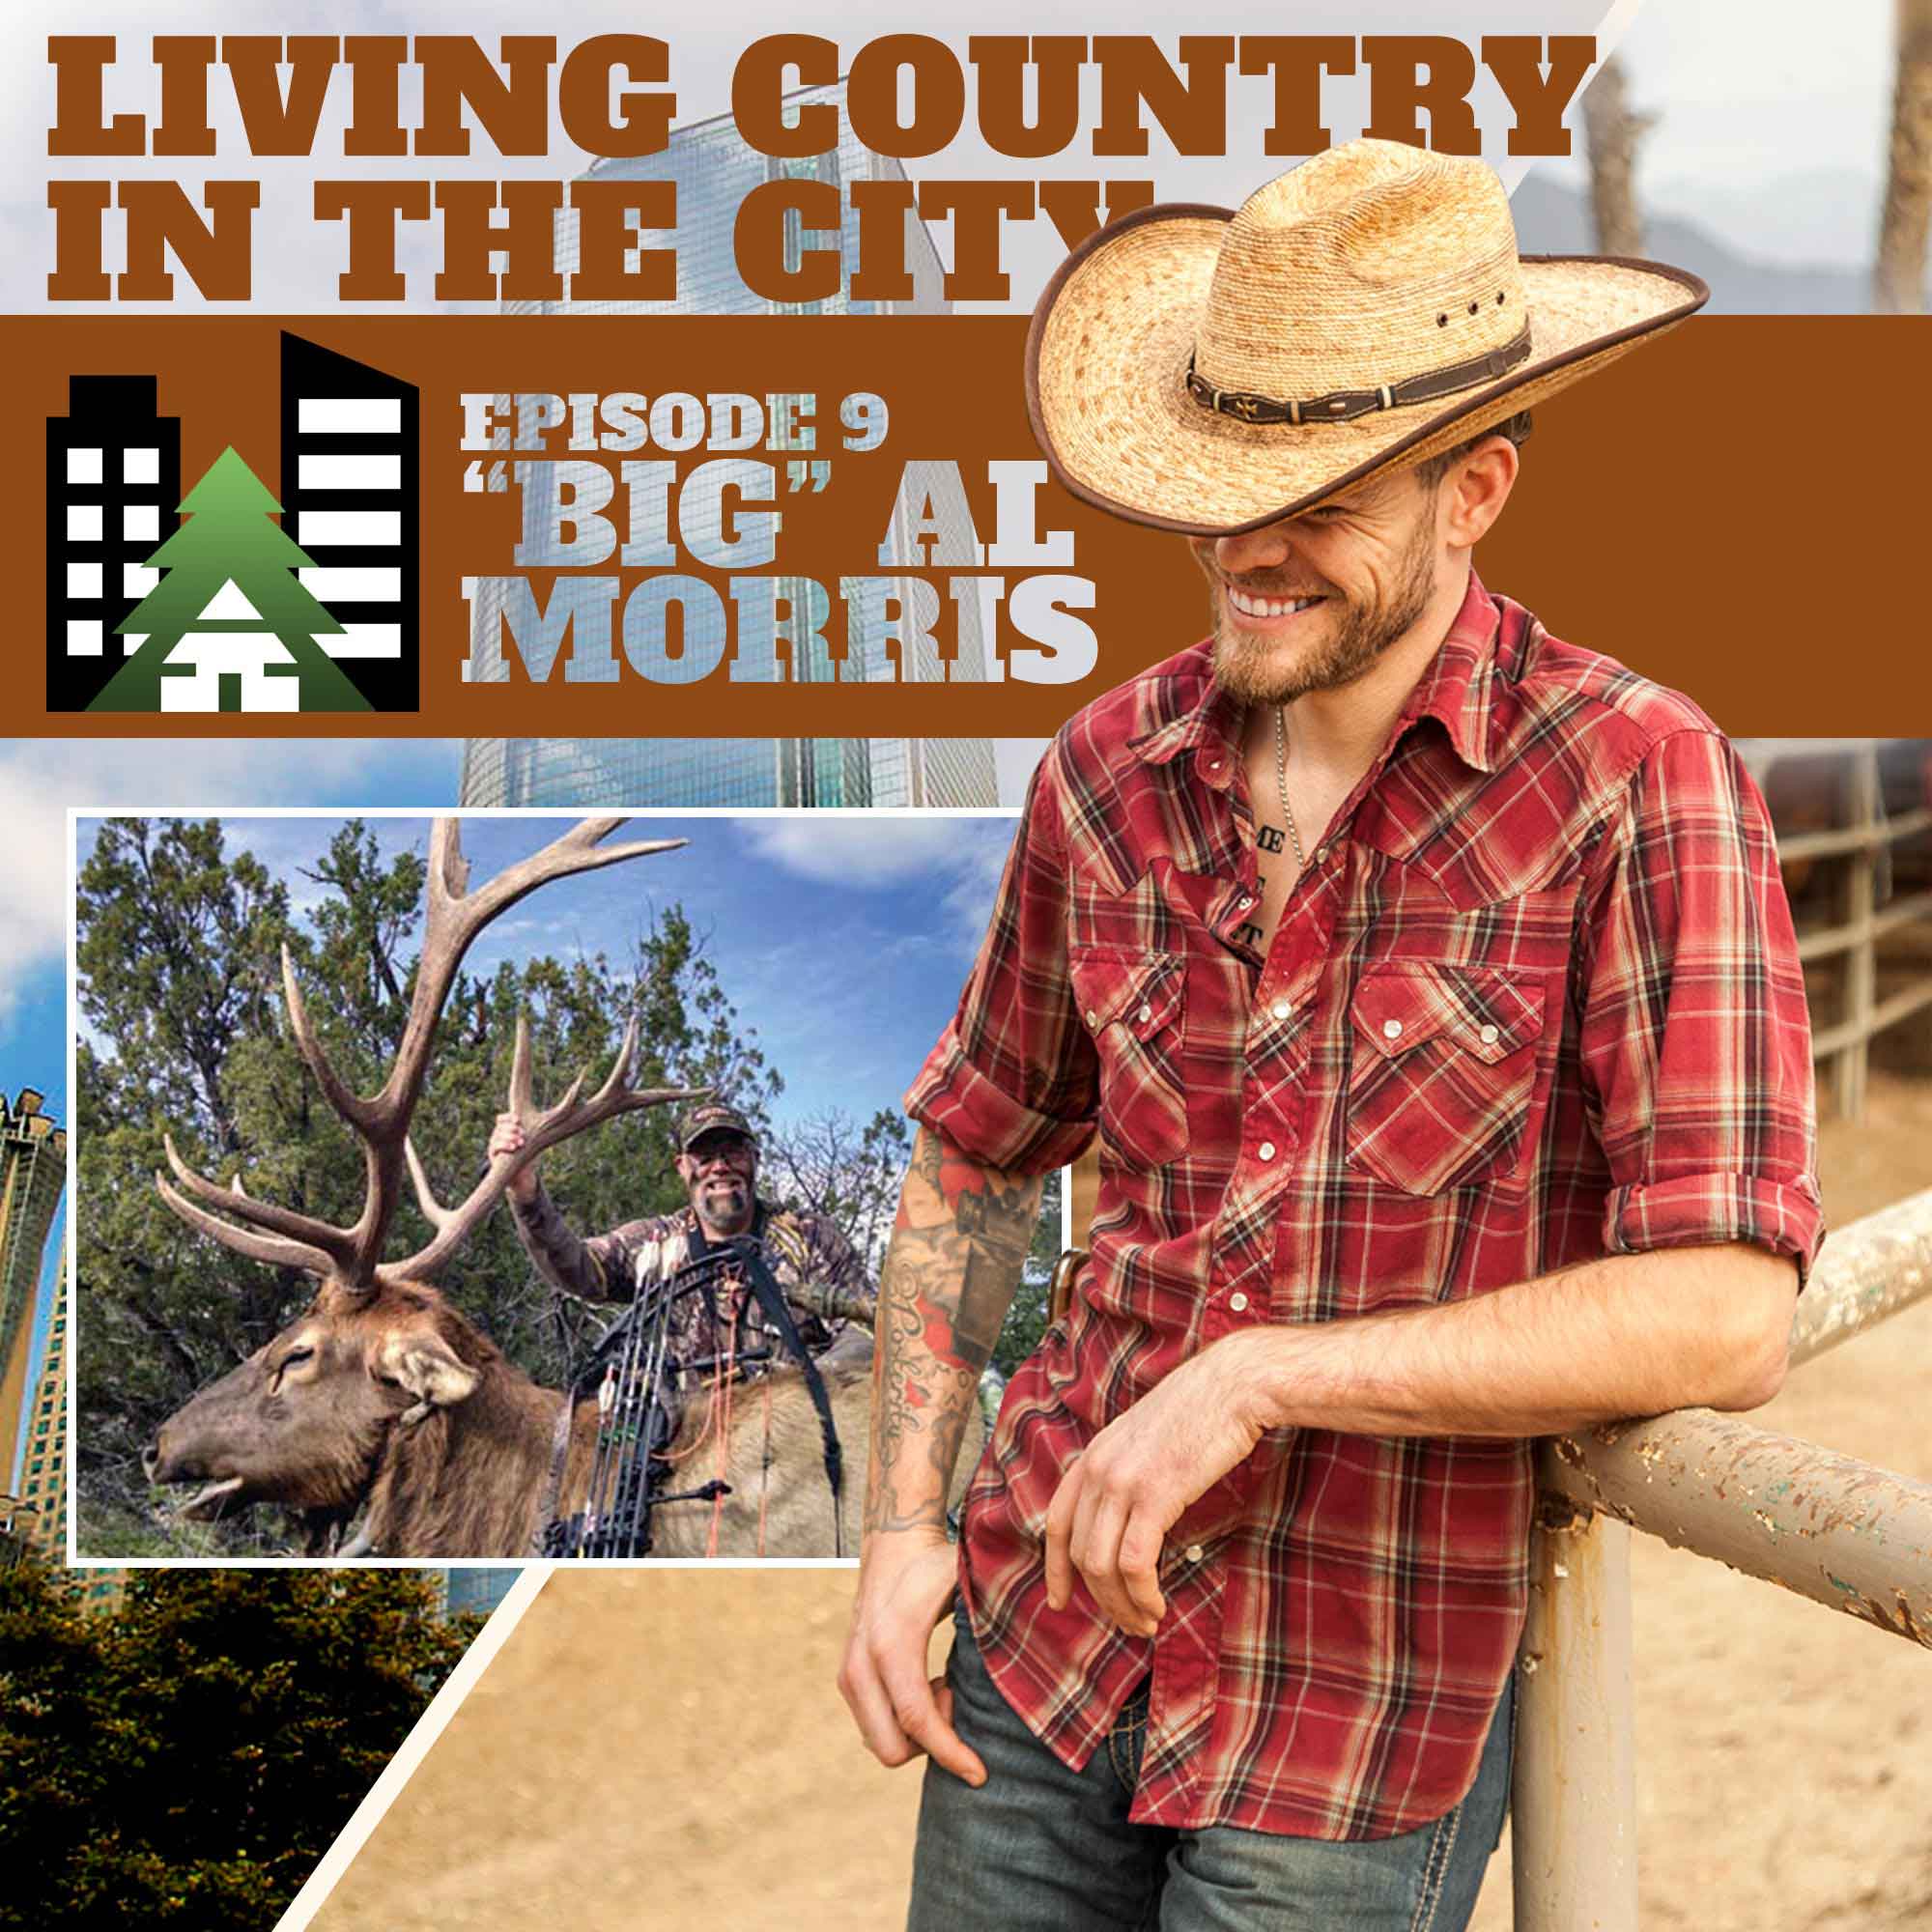 Ep 9 - Intro to Elk Calling with ”Big” Al Morris of FOXPRO